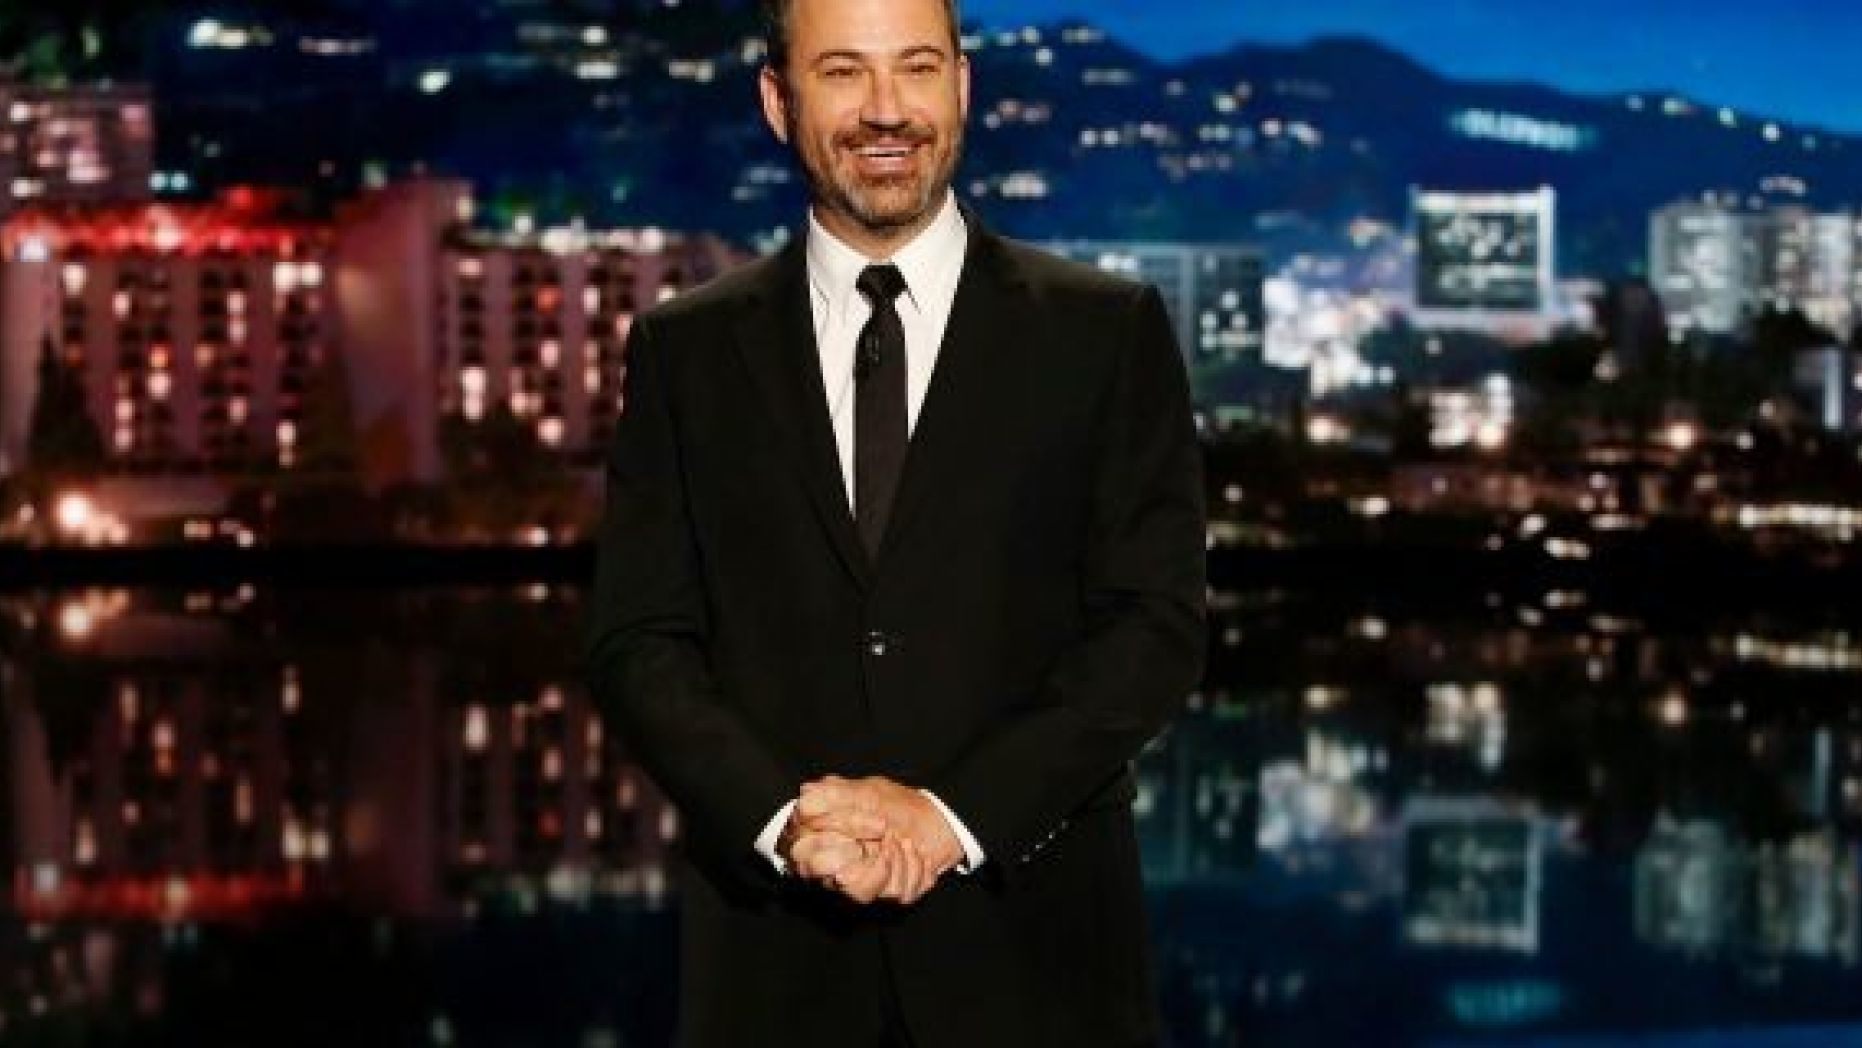 Late night host Jimmy Kimmel weighed in on the closely watched Texas Senate race on Monday night.